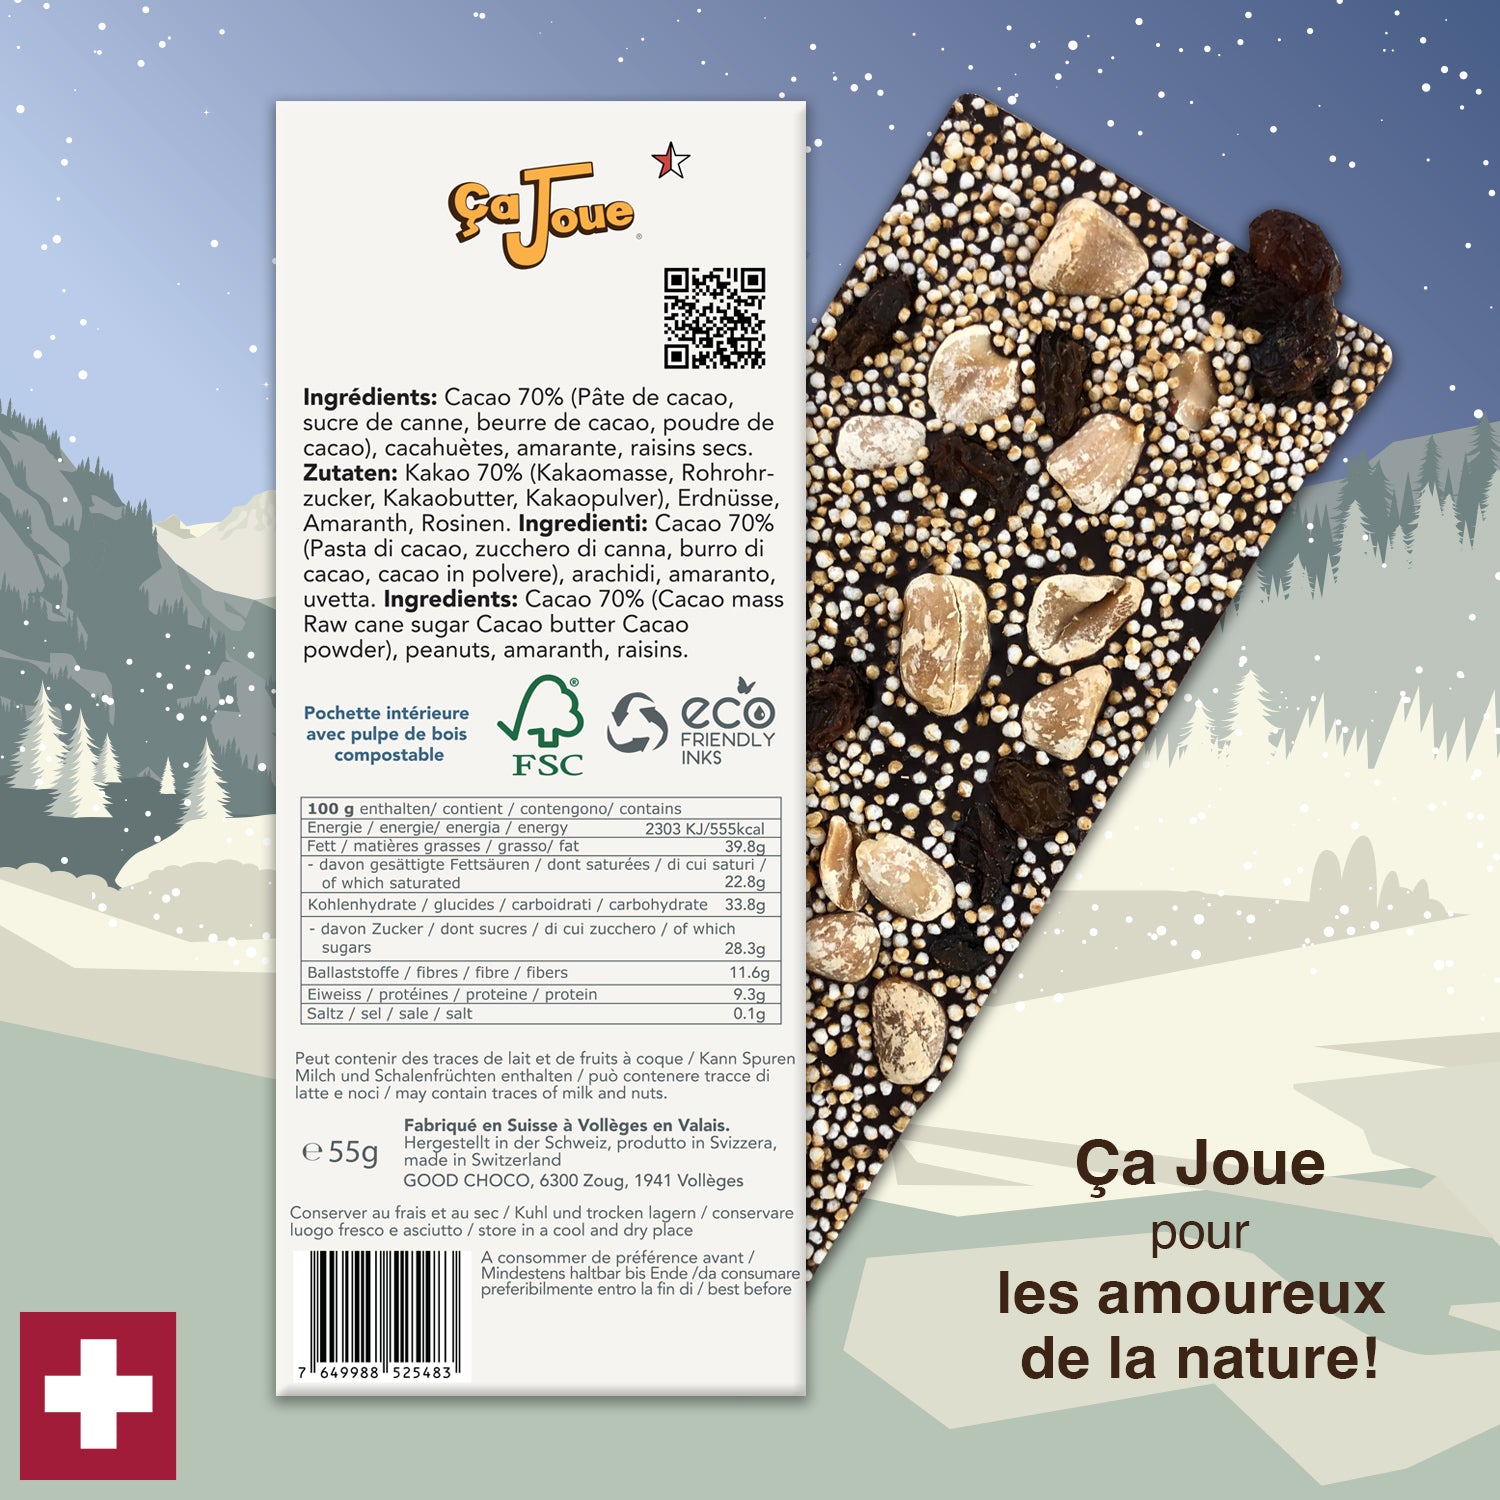 Ça Joue for nature lovers (Ref-BN13) Chocolate from Val de Bagnes